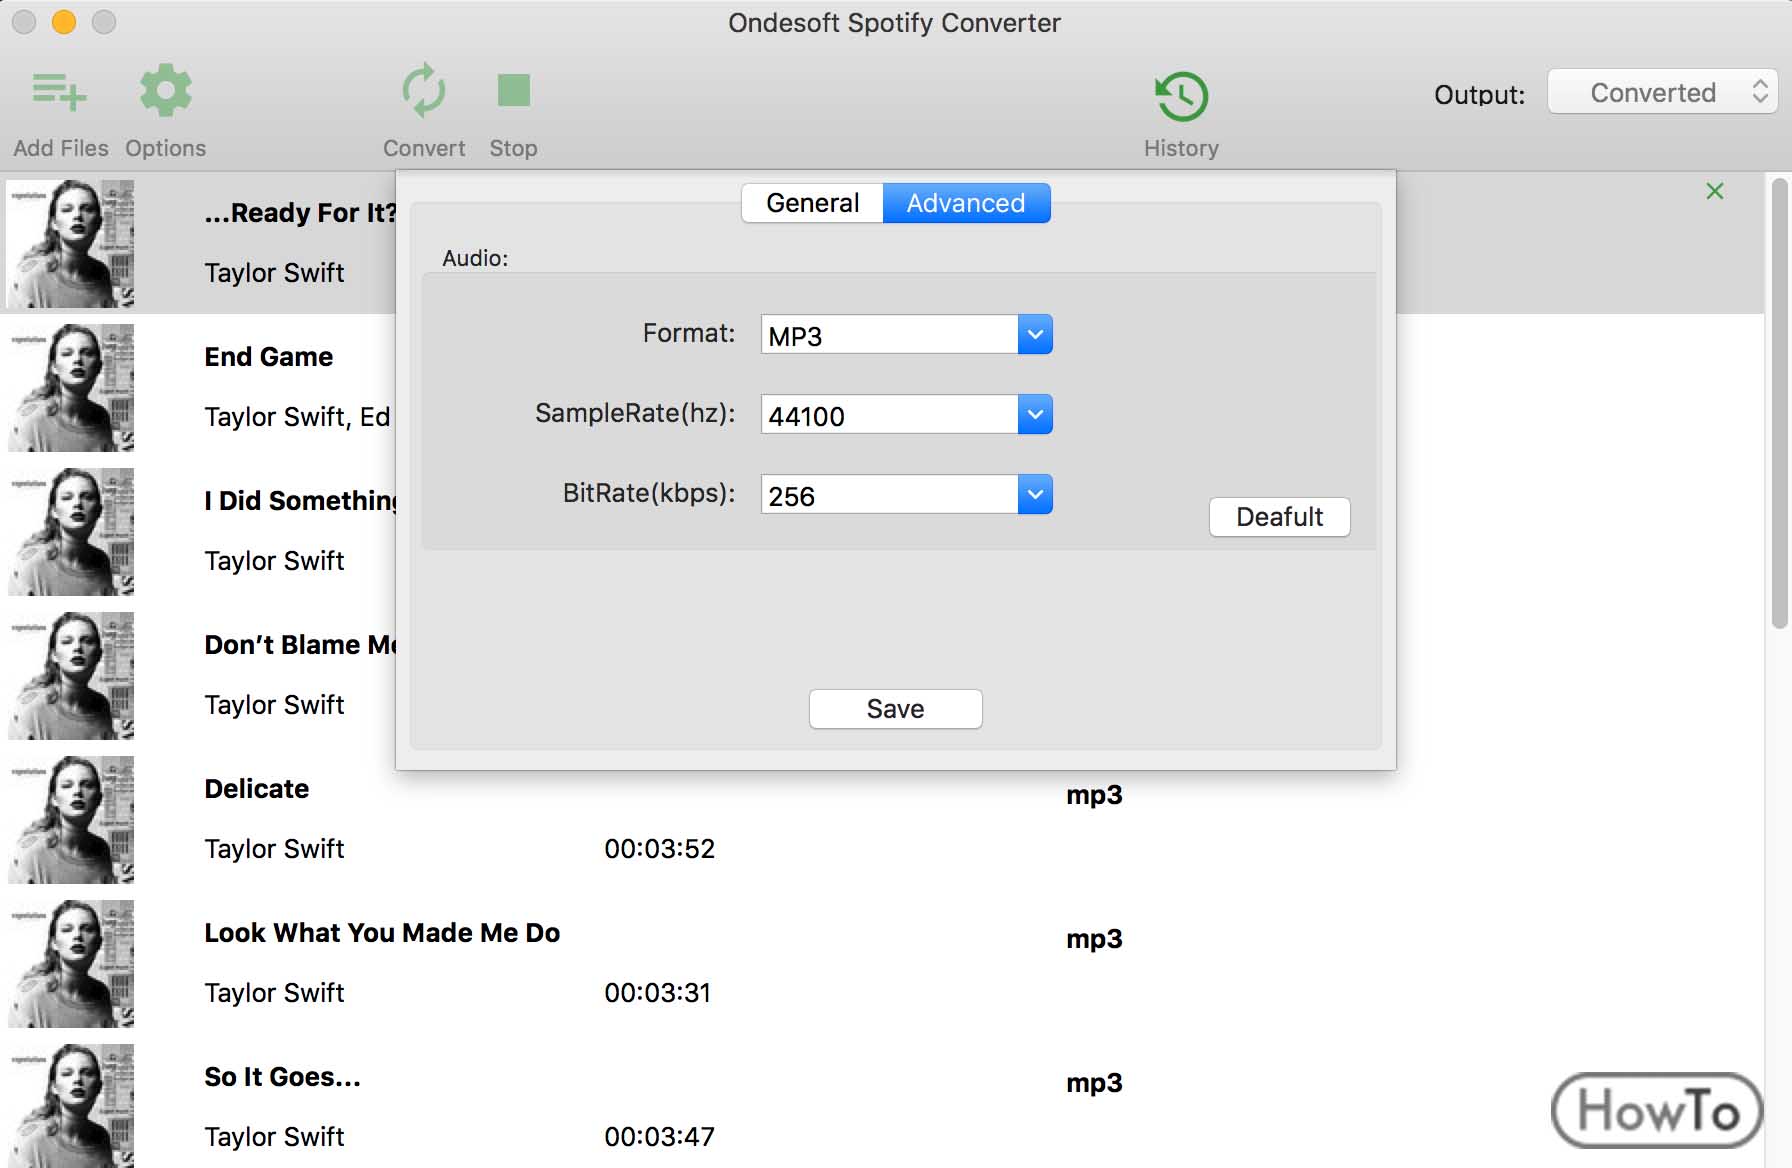 how to cancel spotify premium forgot account